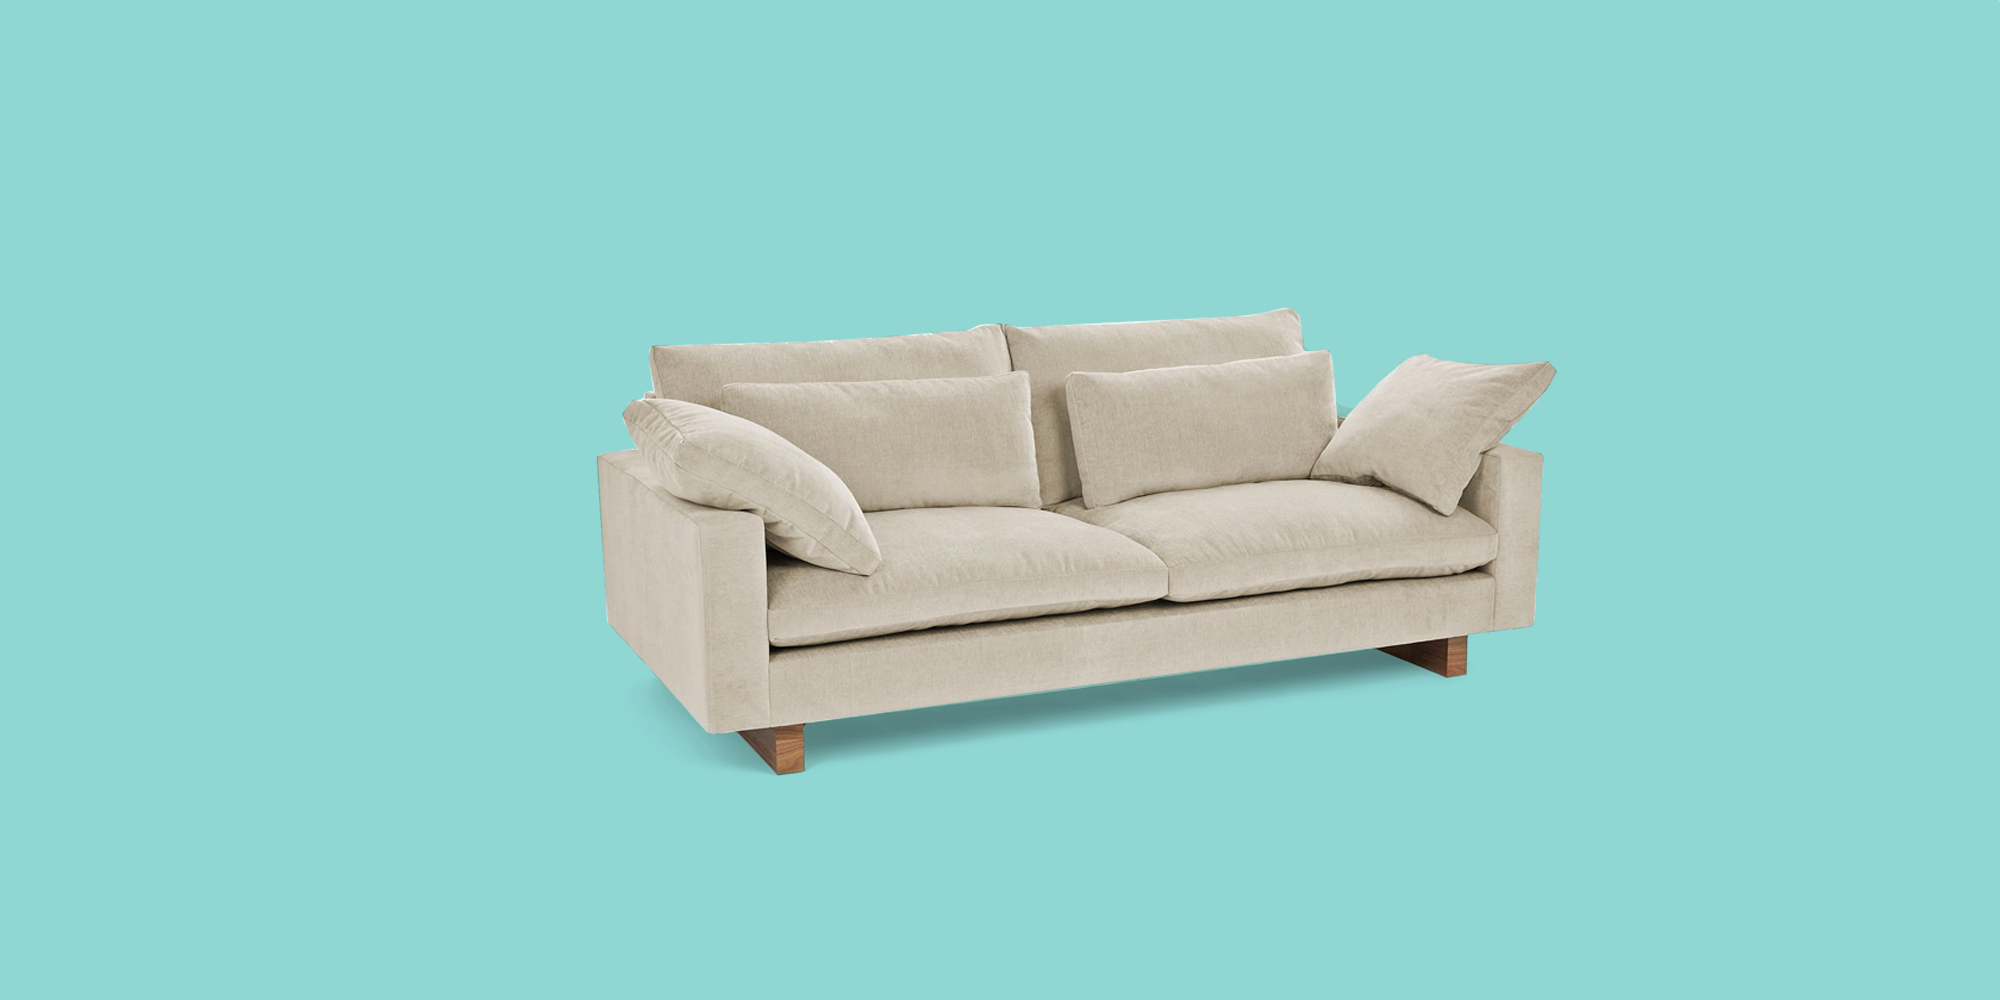 A Two-Toned Sofa Is the Best of Both Worlds